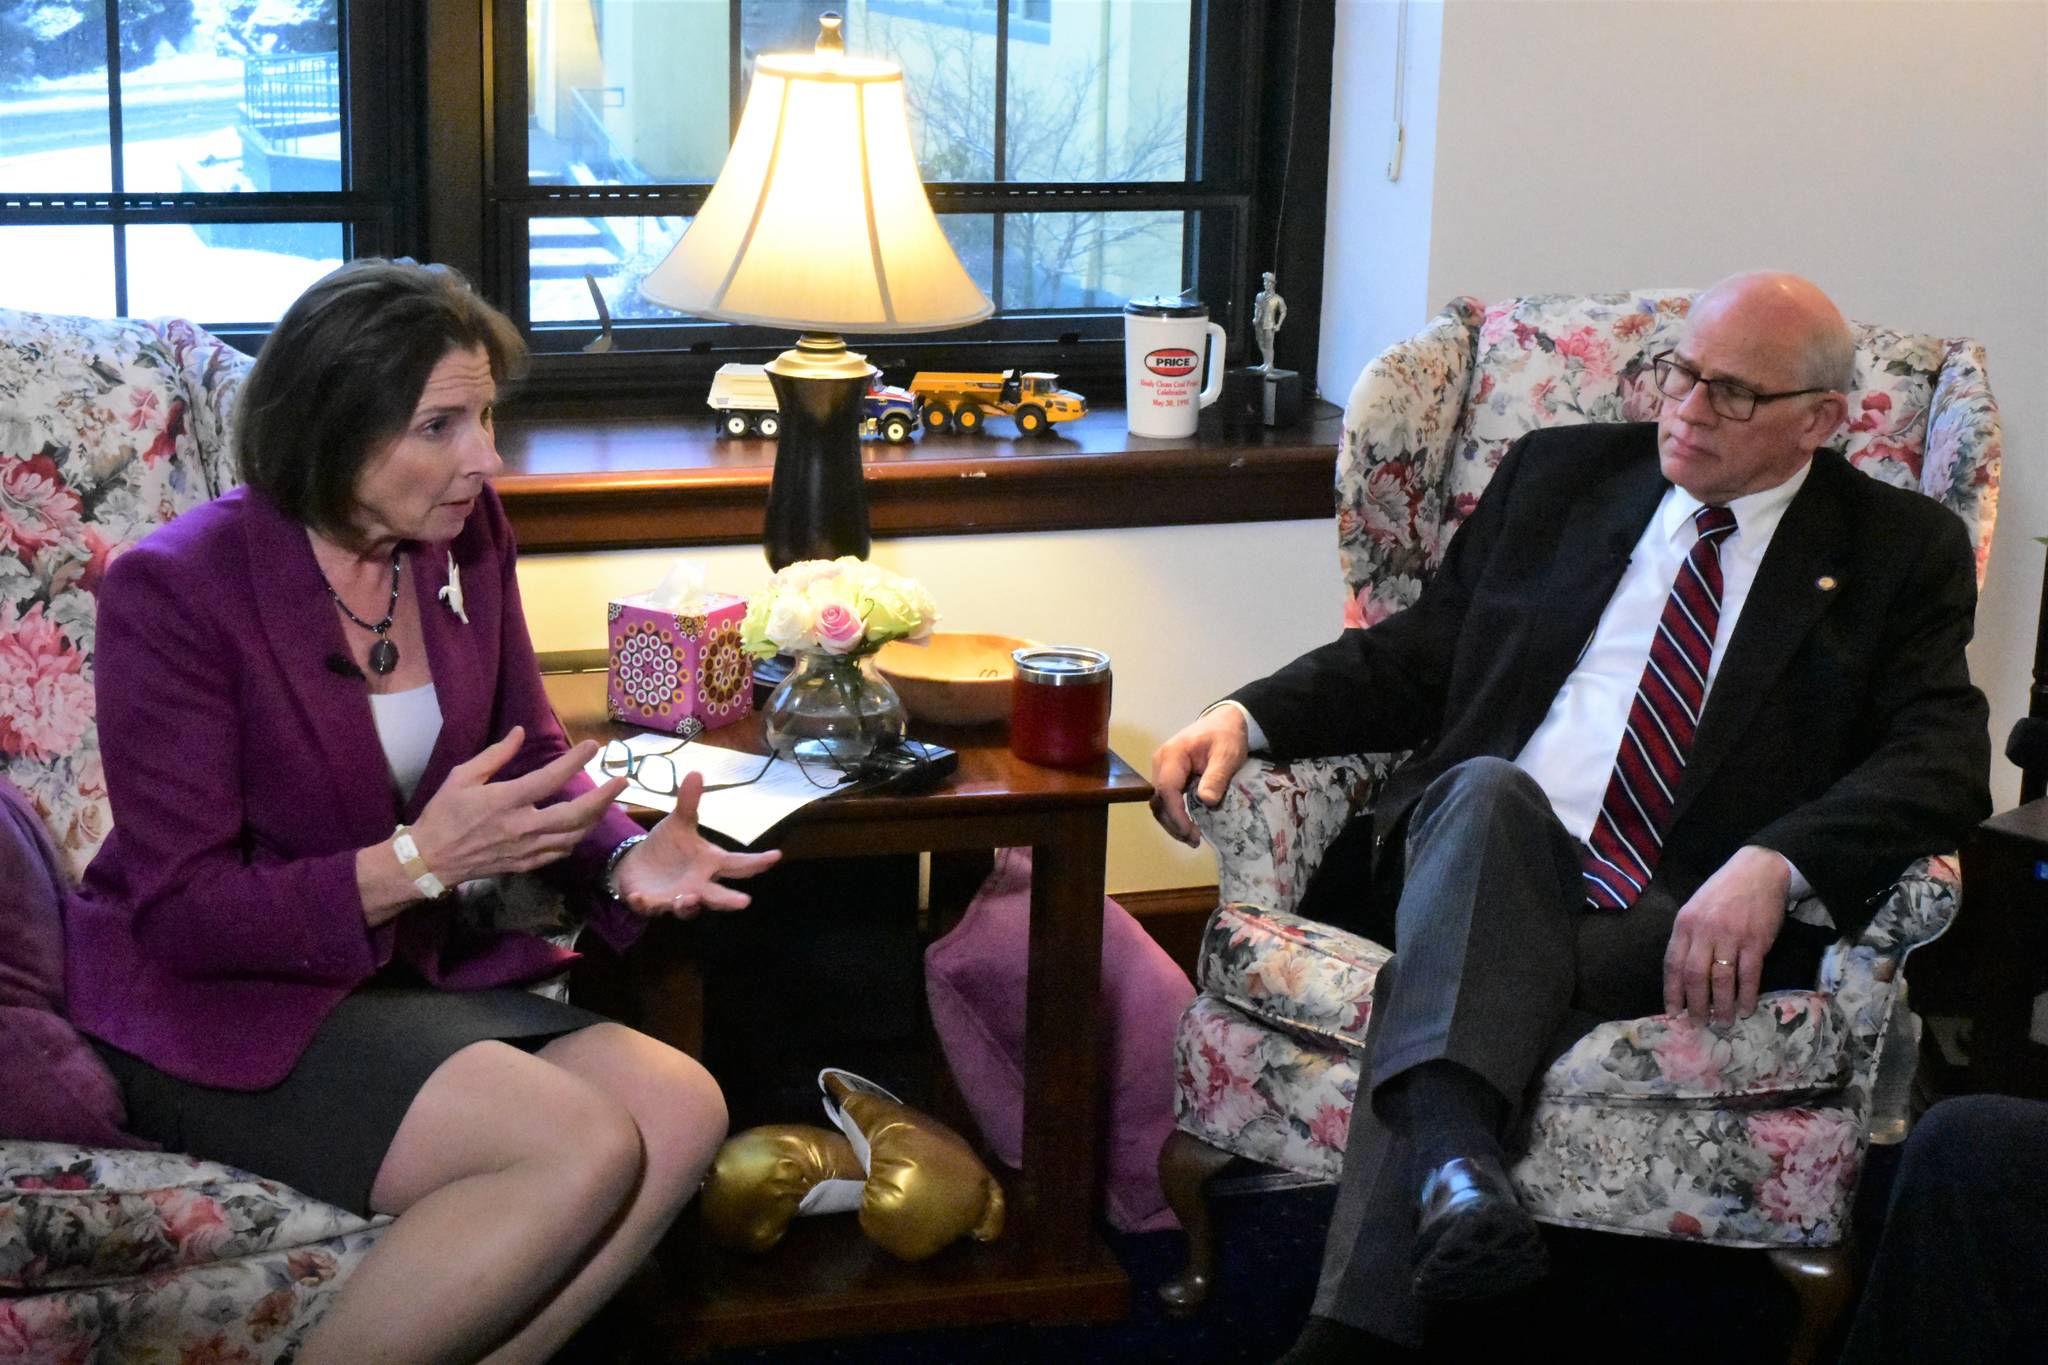 Senate President Cathy Giessel, R-Anchorage, and Sen. John Coghill, R-North Pole, meet with reporters in Giessel’s office following the joint session on Friday. (Peter Segall | Juneau Empire)